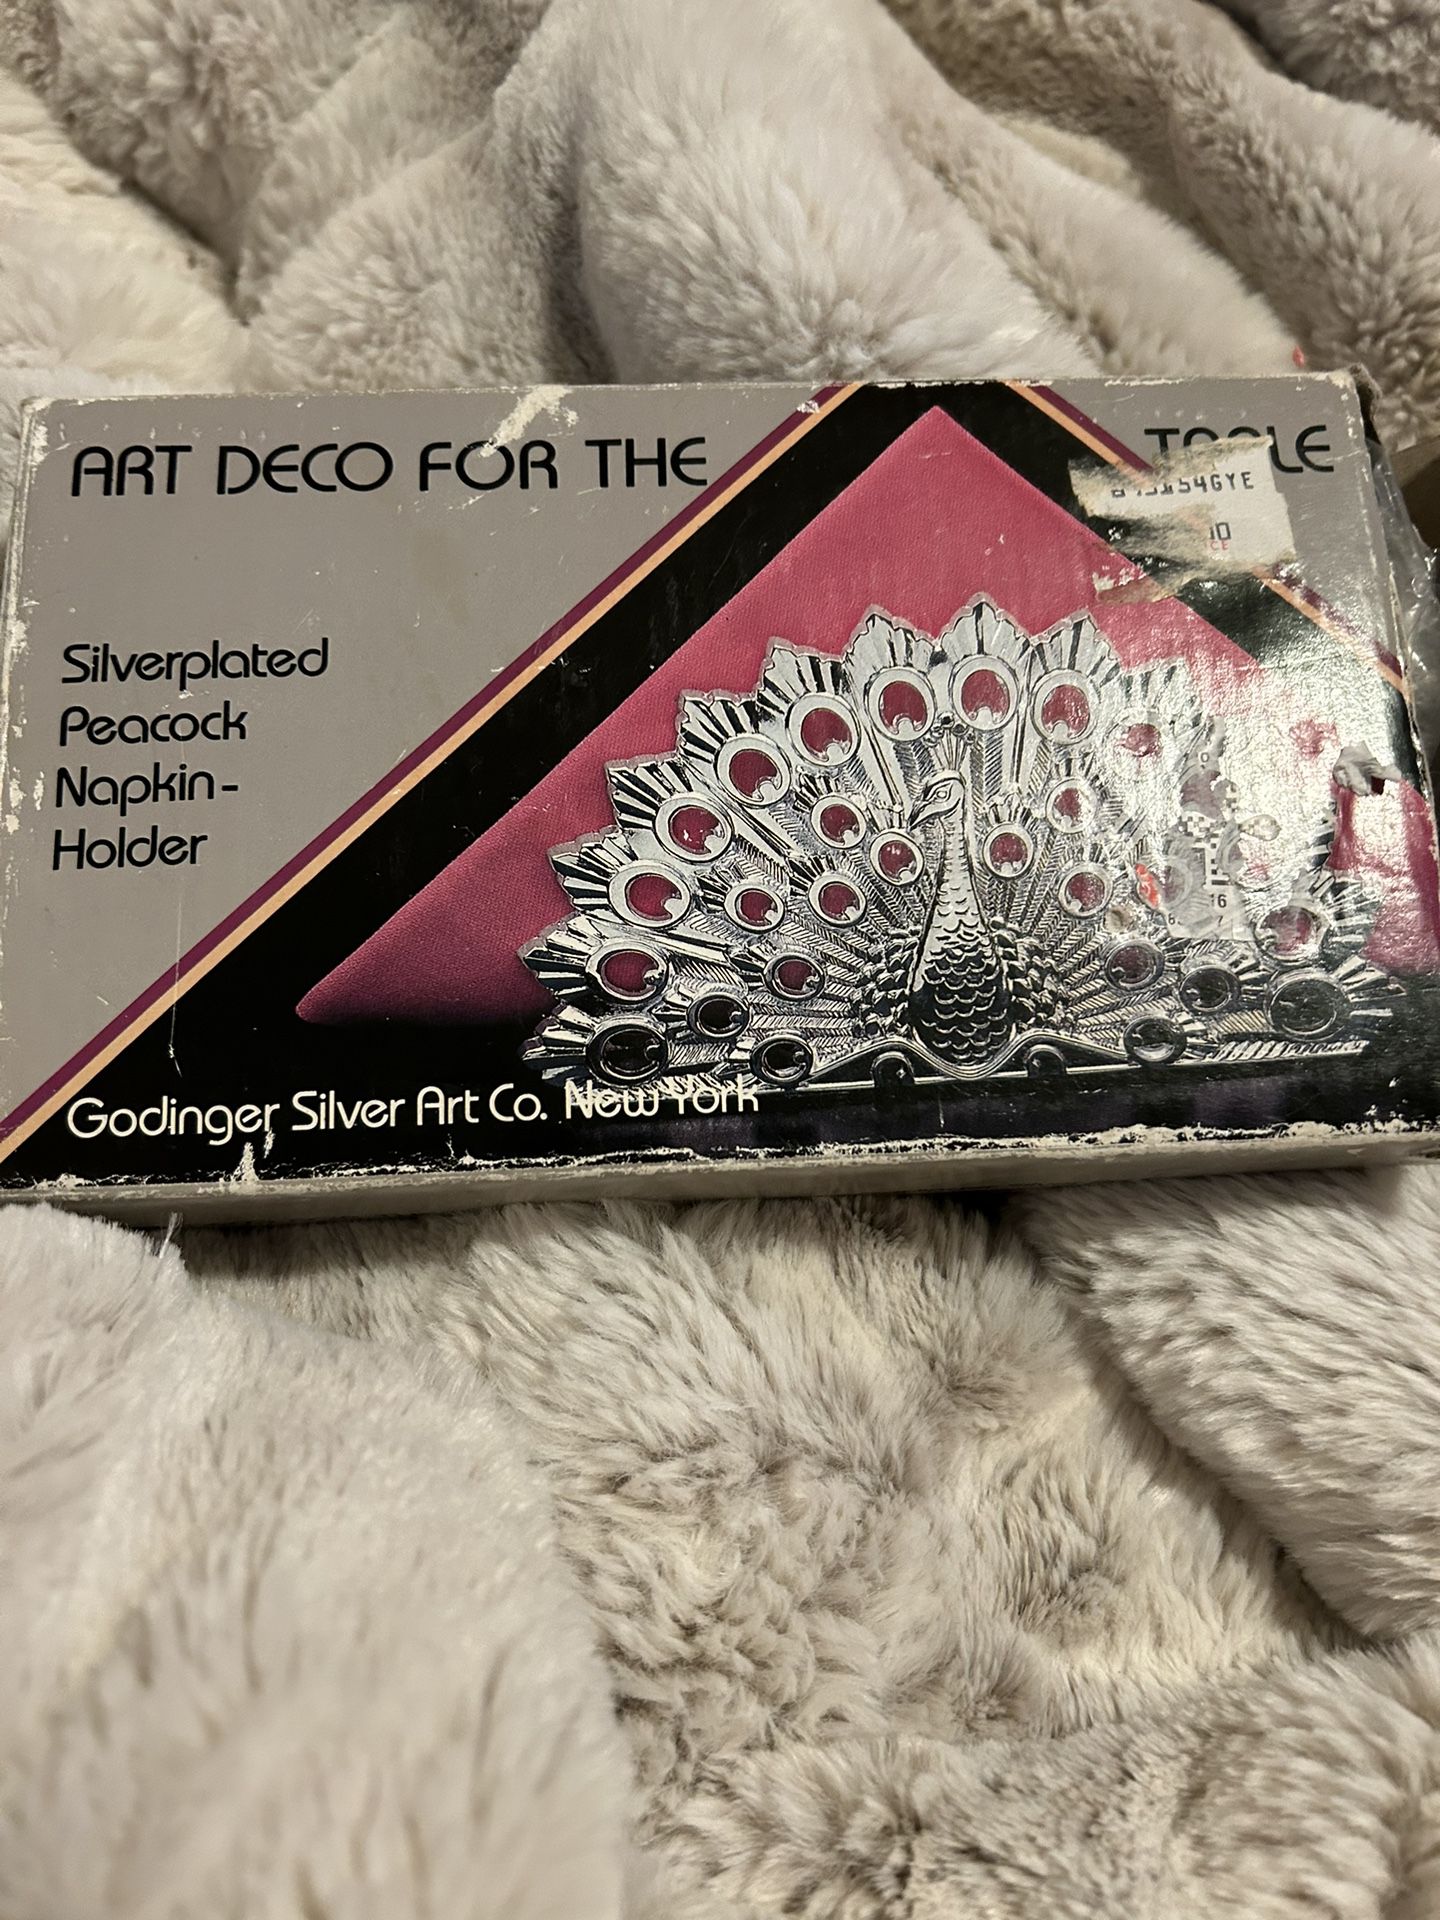 Silver plated Peacock Napkin Holder